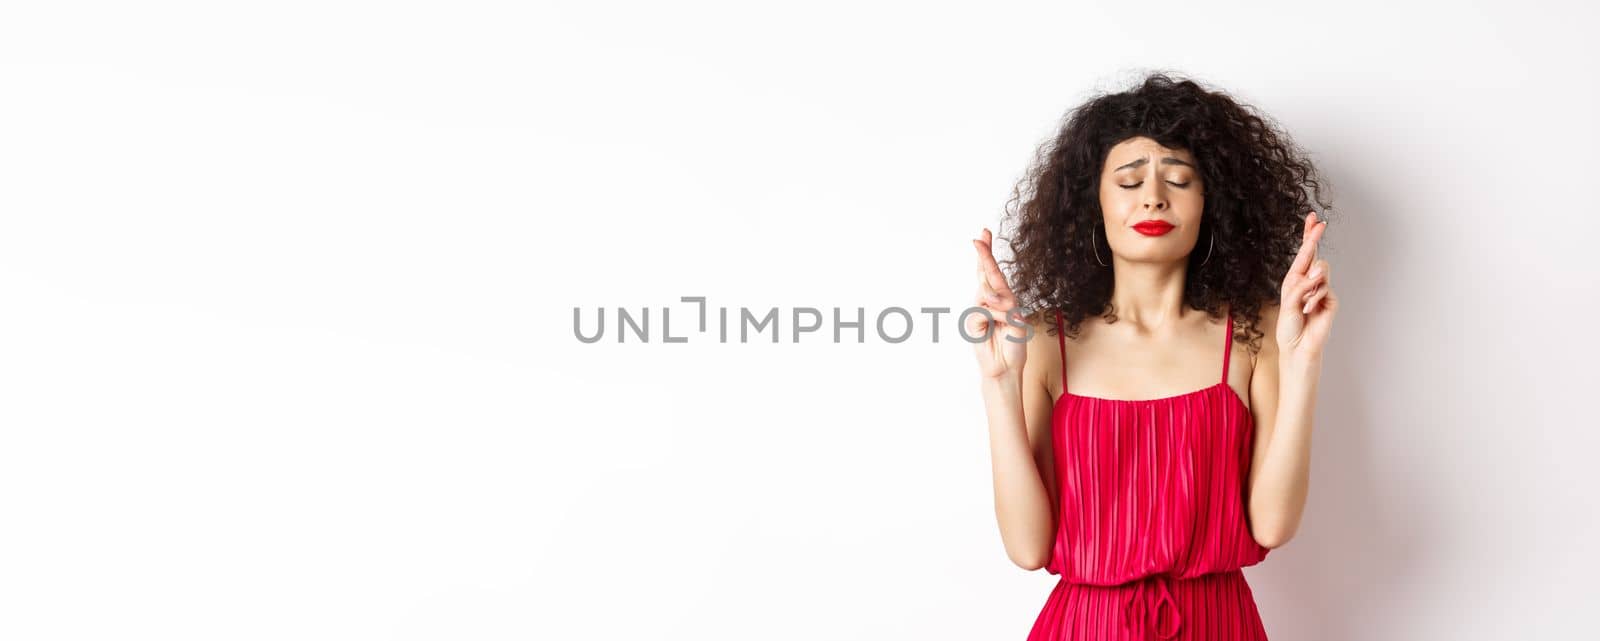 Hopeful woman in red dress making wish, praying with fingers crossed and closed eyes, pleading god, standing over white background.